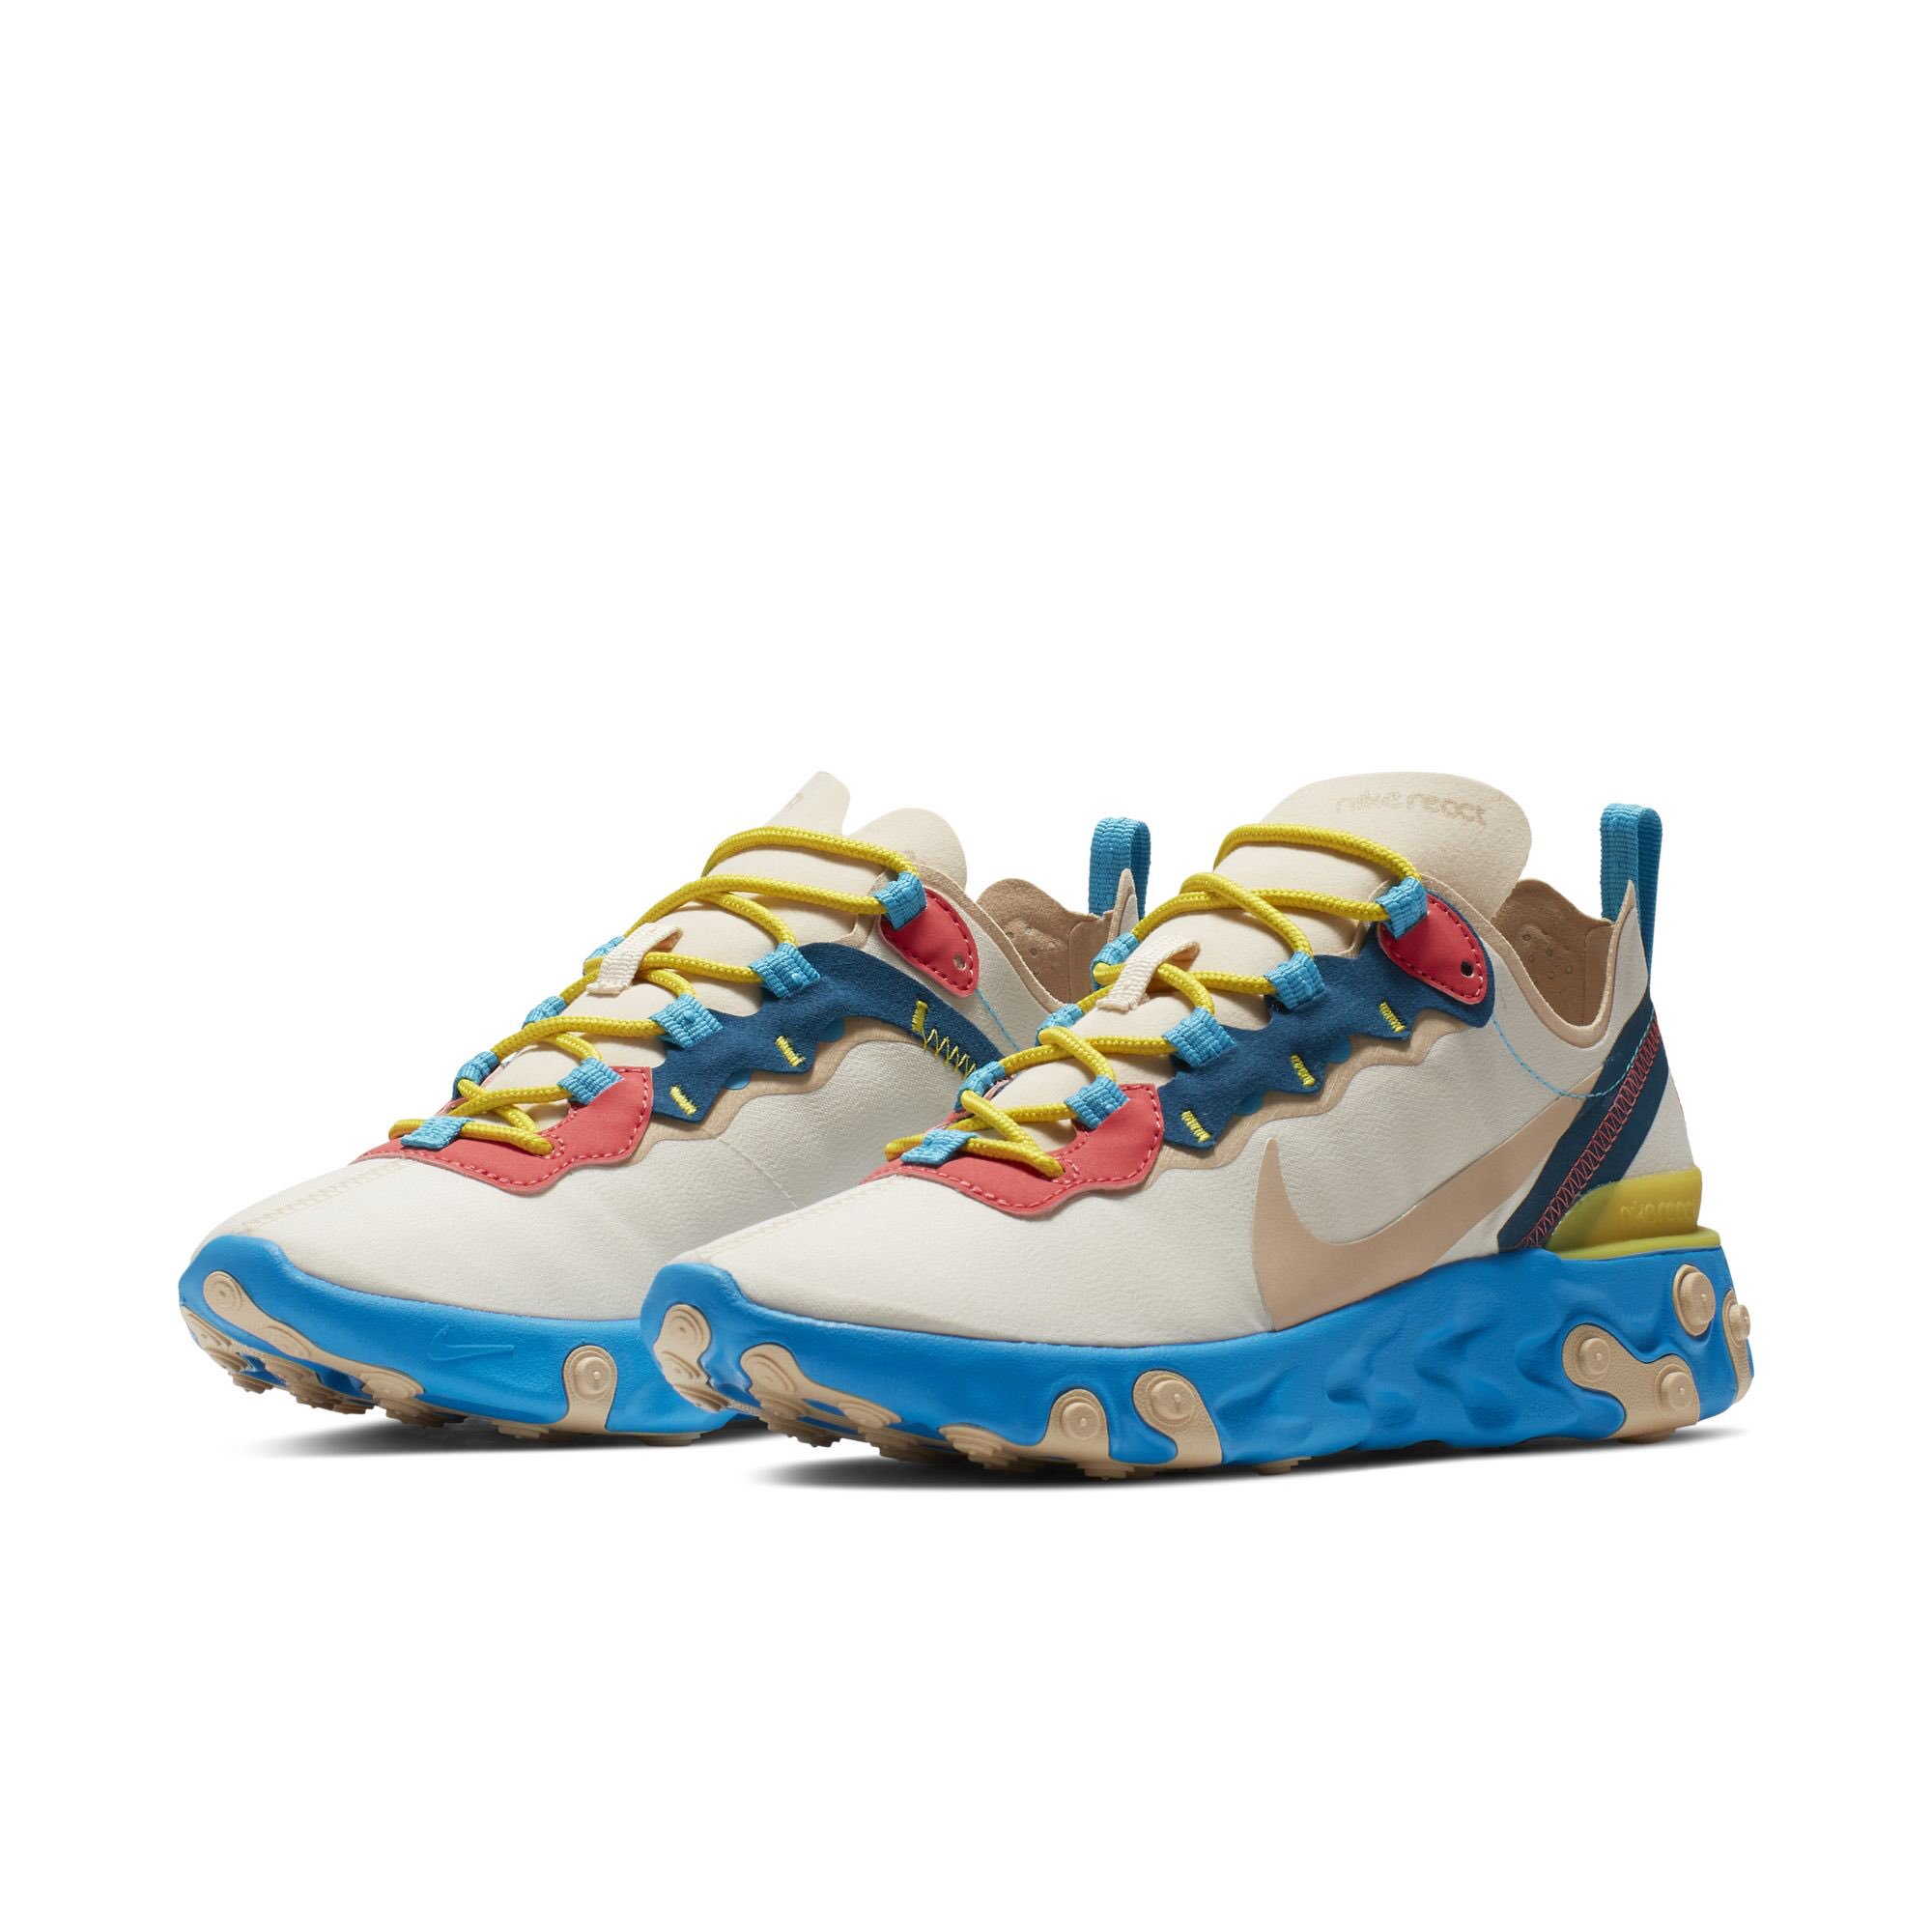 Bold Nike React Element 55 Colorway 